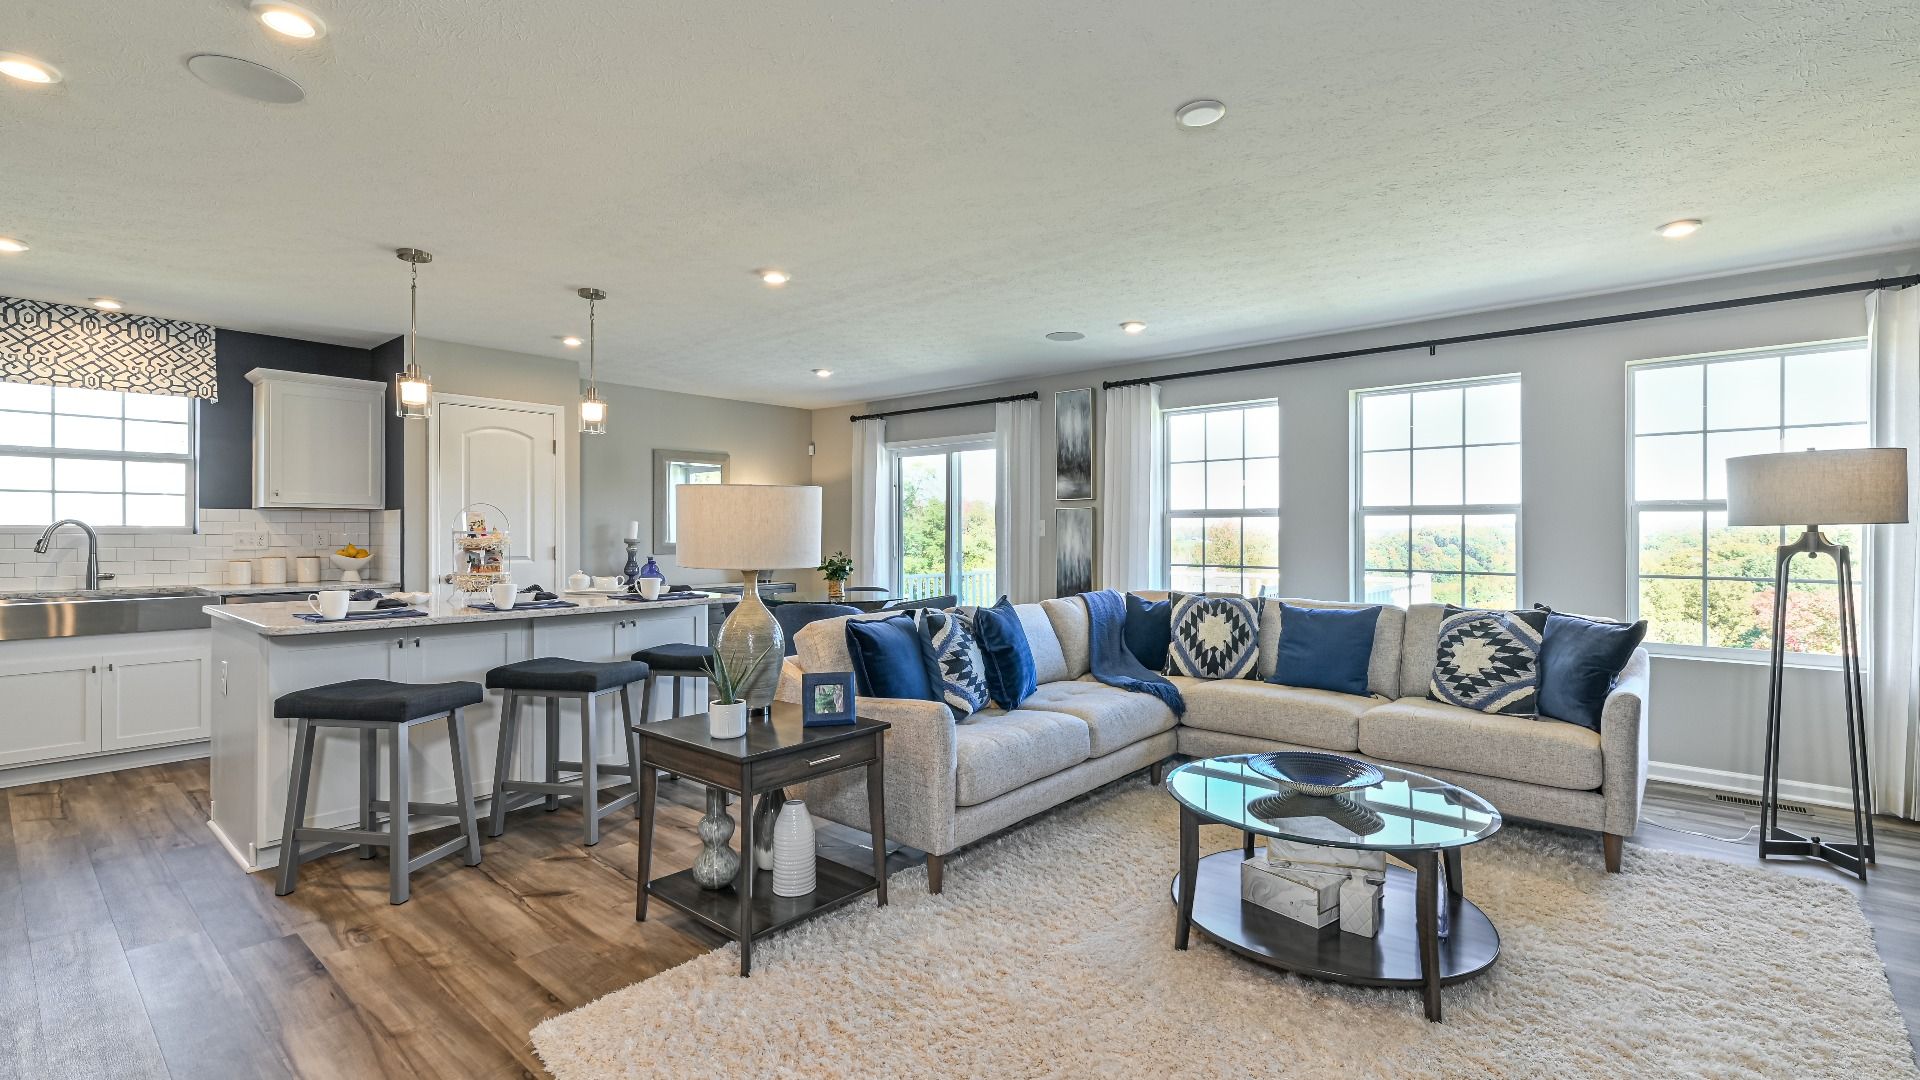 Edgewood II Model at Eastview Manor - Open Concept Main Floor:Open family room with 3 large windows along rear wall, kitchen white cabinets, large island, open dining area.